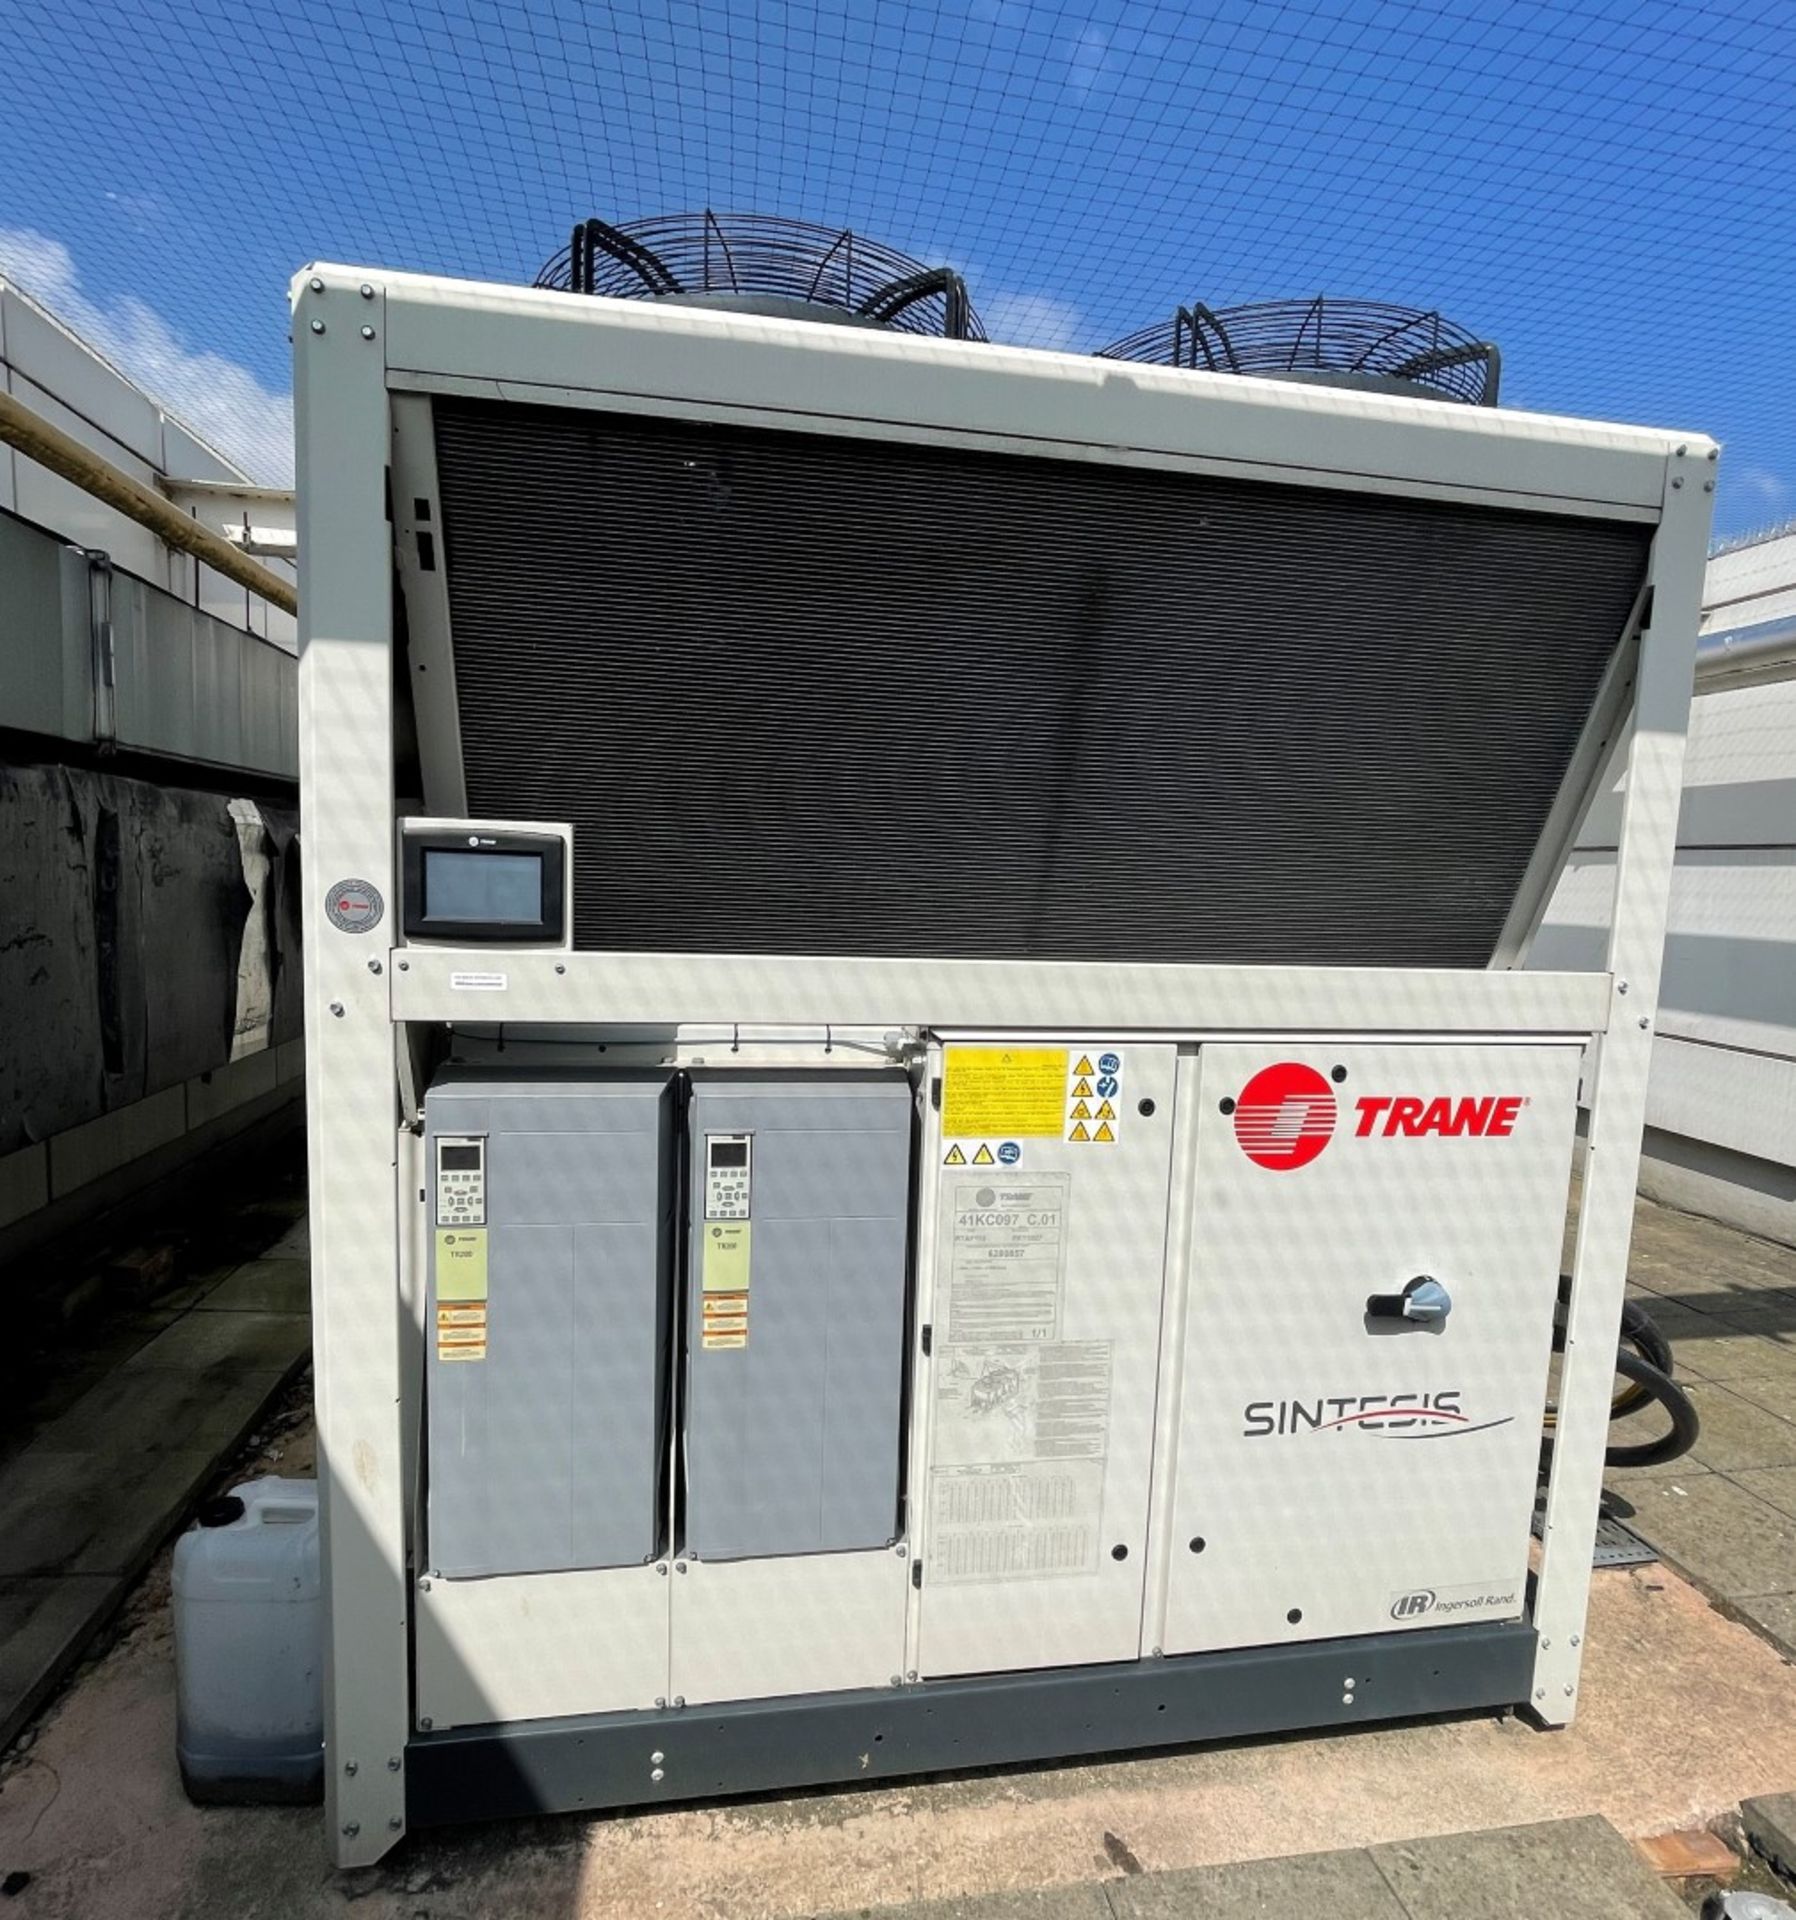 1 x TRANE/SINTESIS RTAF 105 Air-Cooled Screw Chiller - To Be Removed From An Executive Office - Image 6 of 105